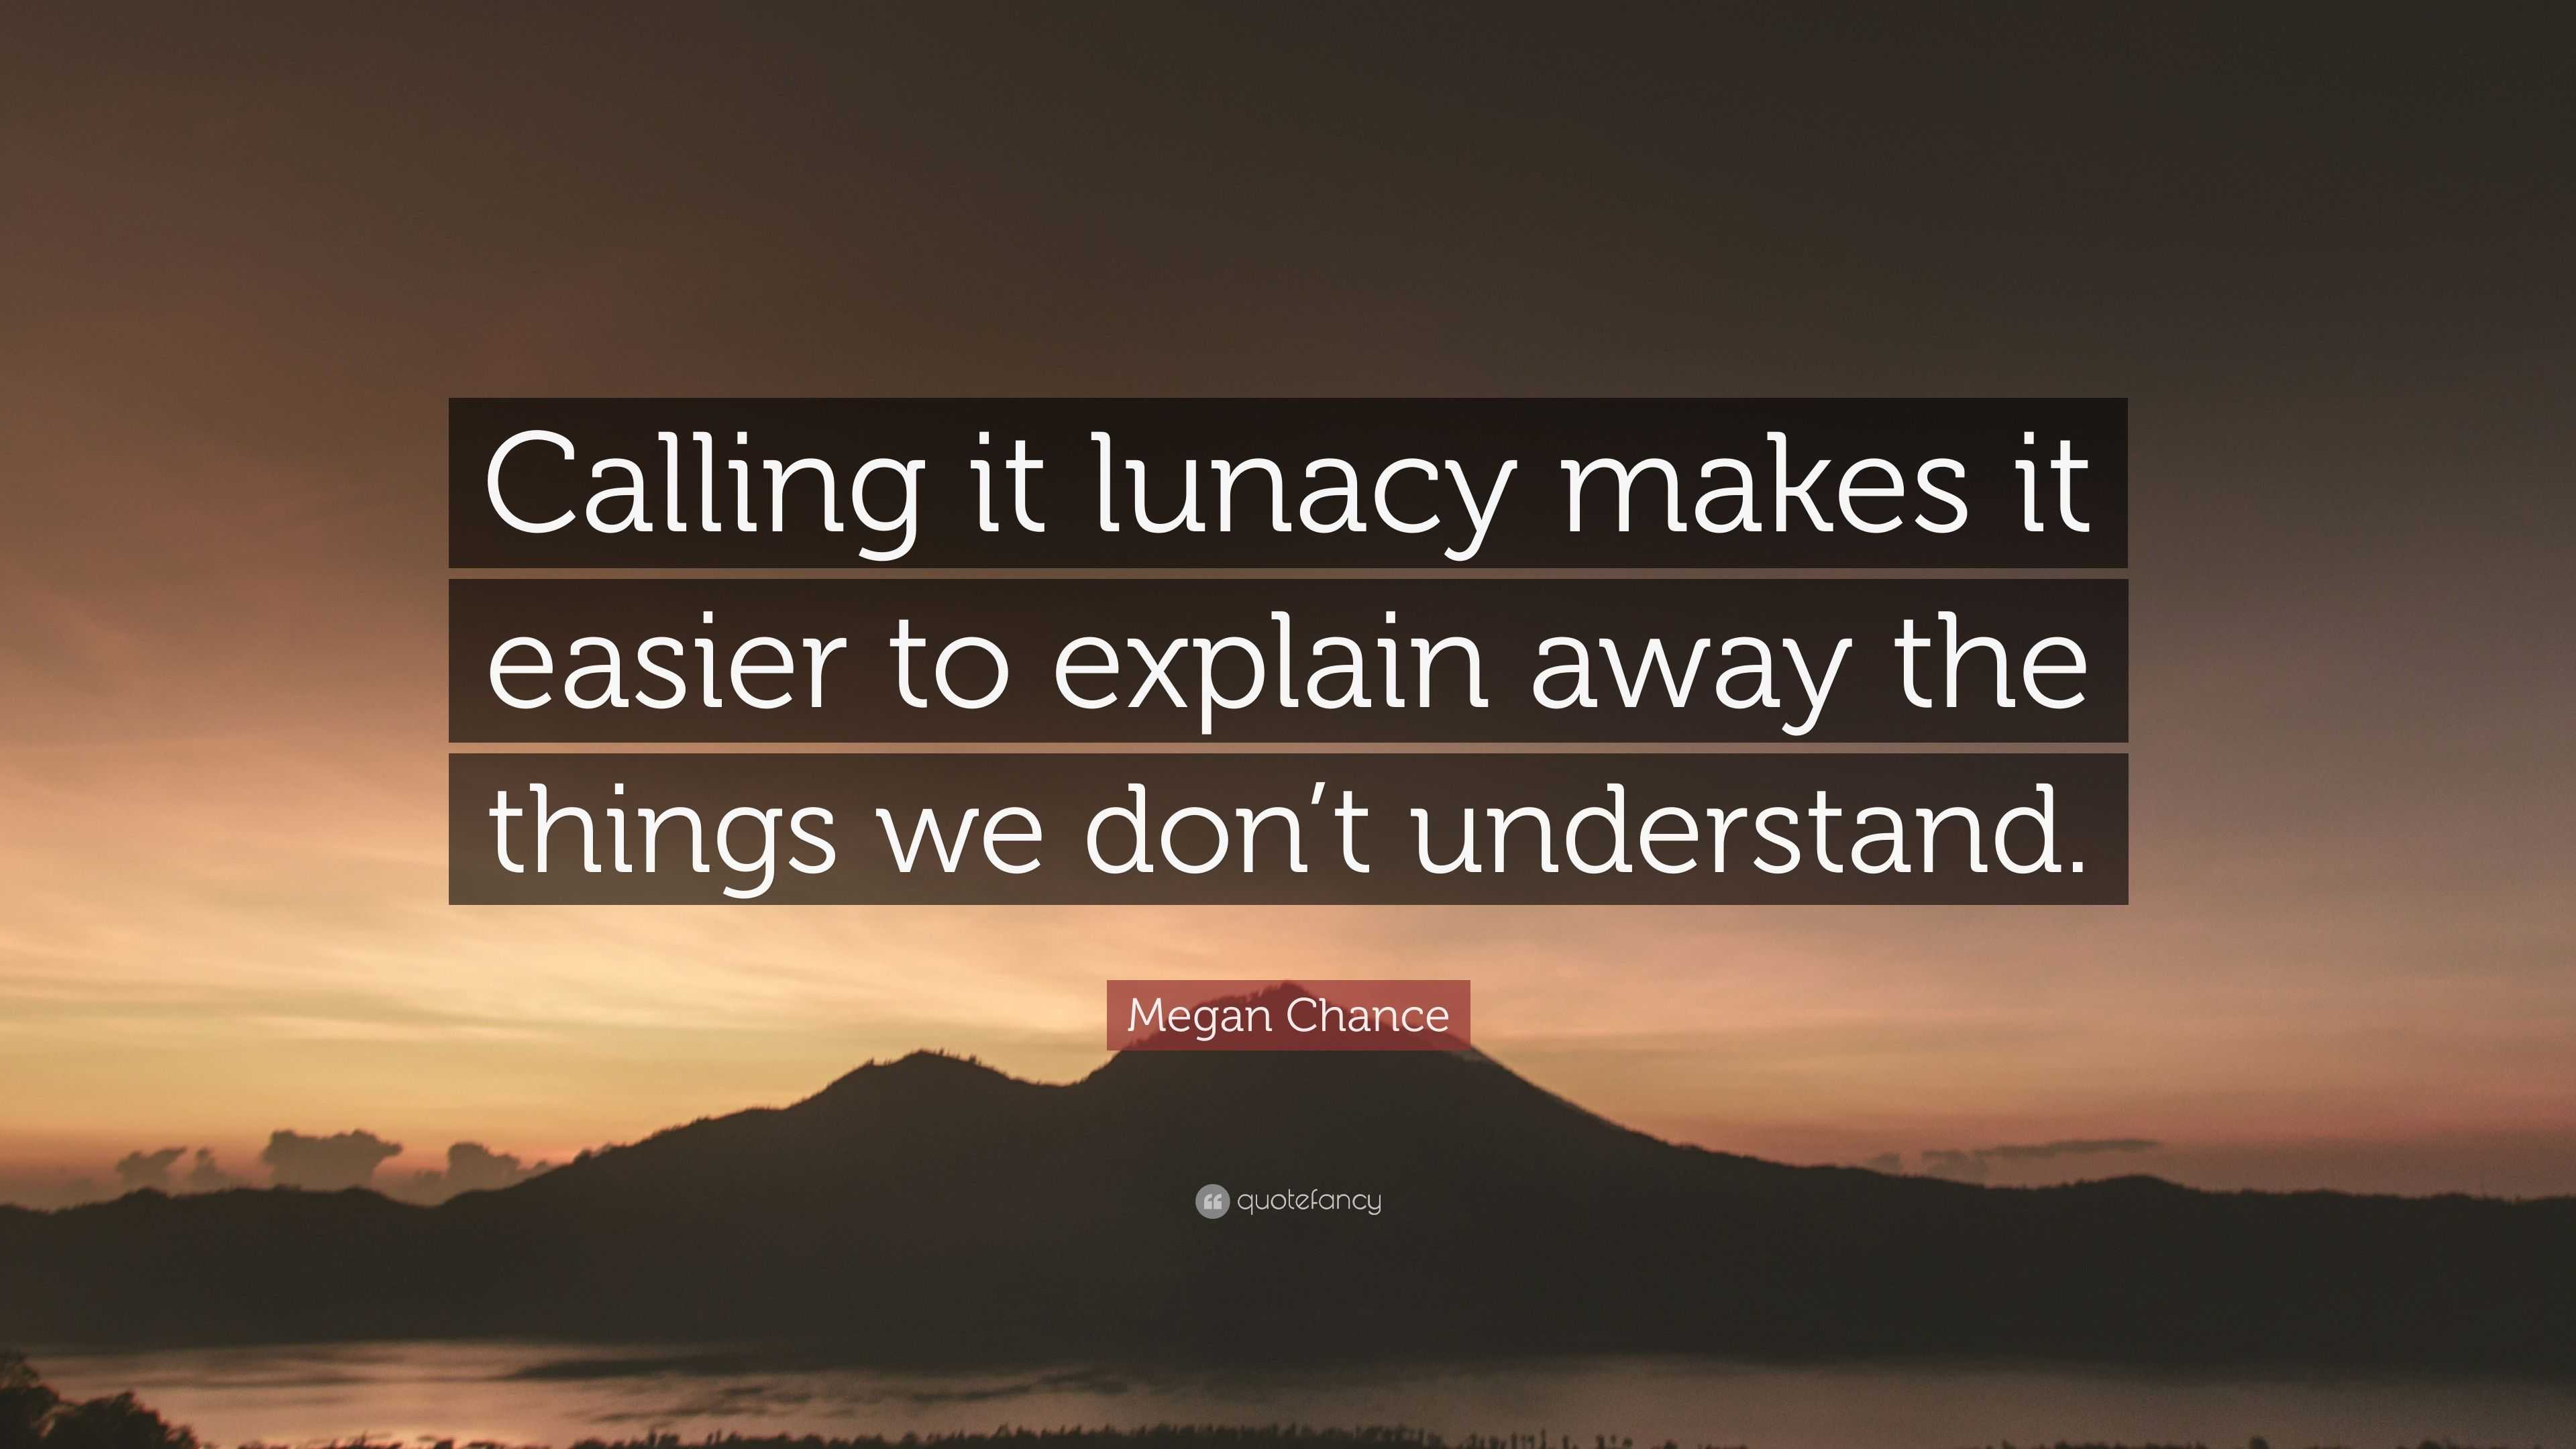 quotes about lunacy